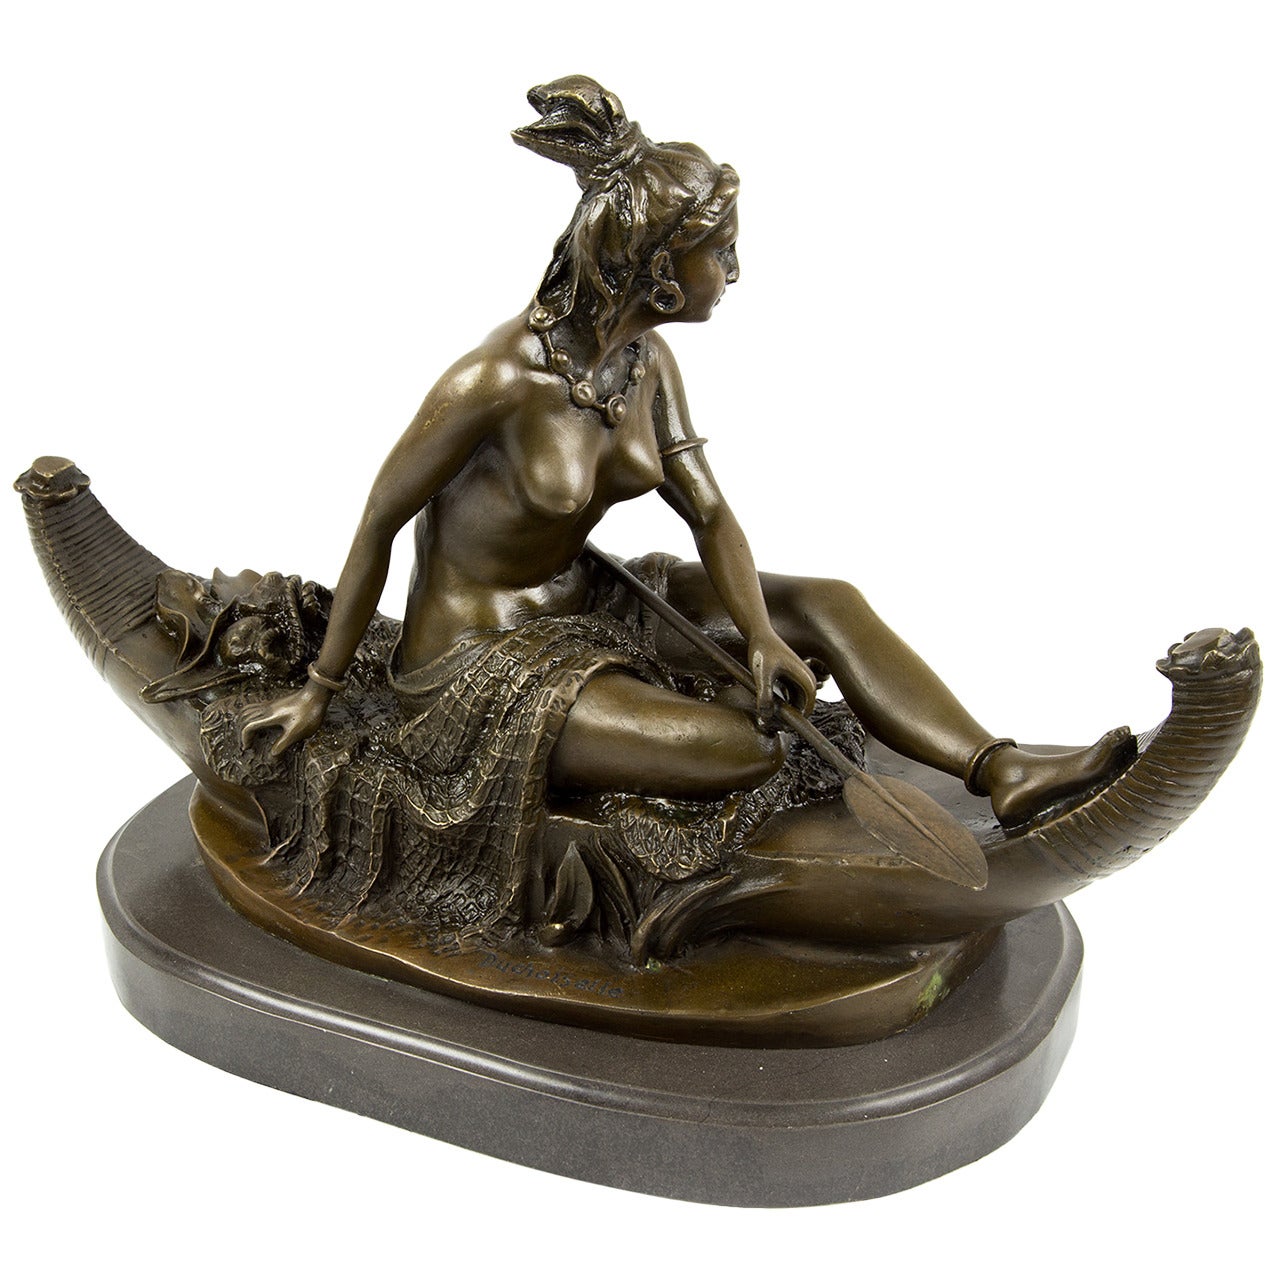 Indian Maiden Sitting in a Canoe Bronze Sculpture by Duchoiselle, 19th Century